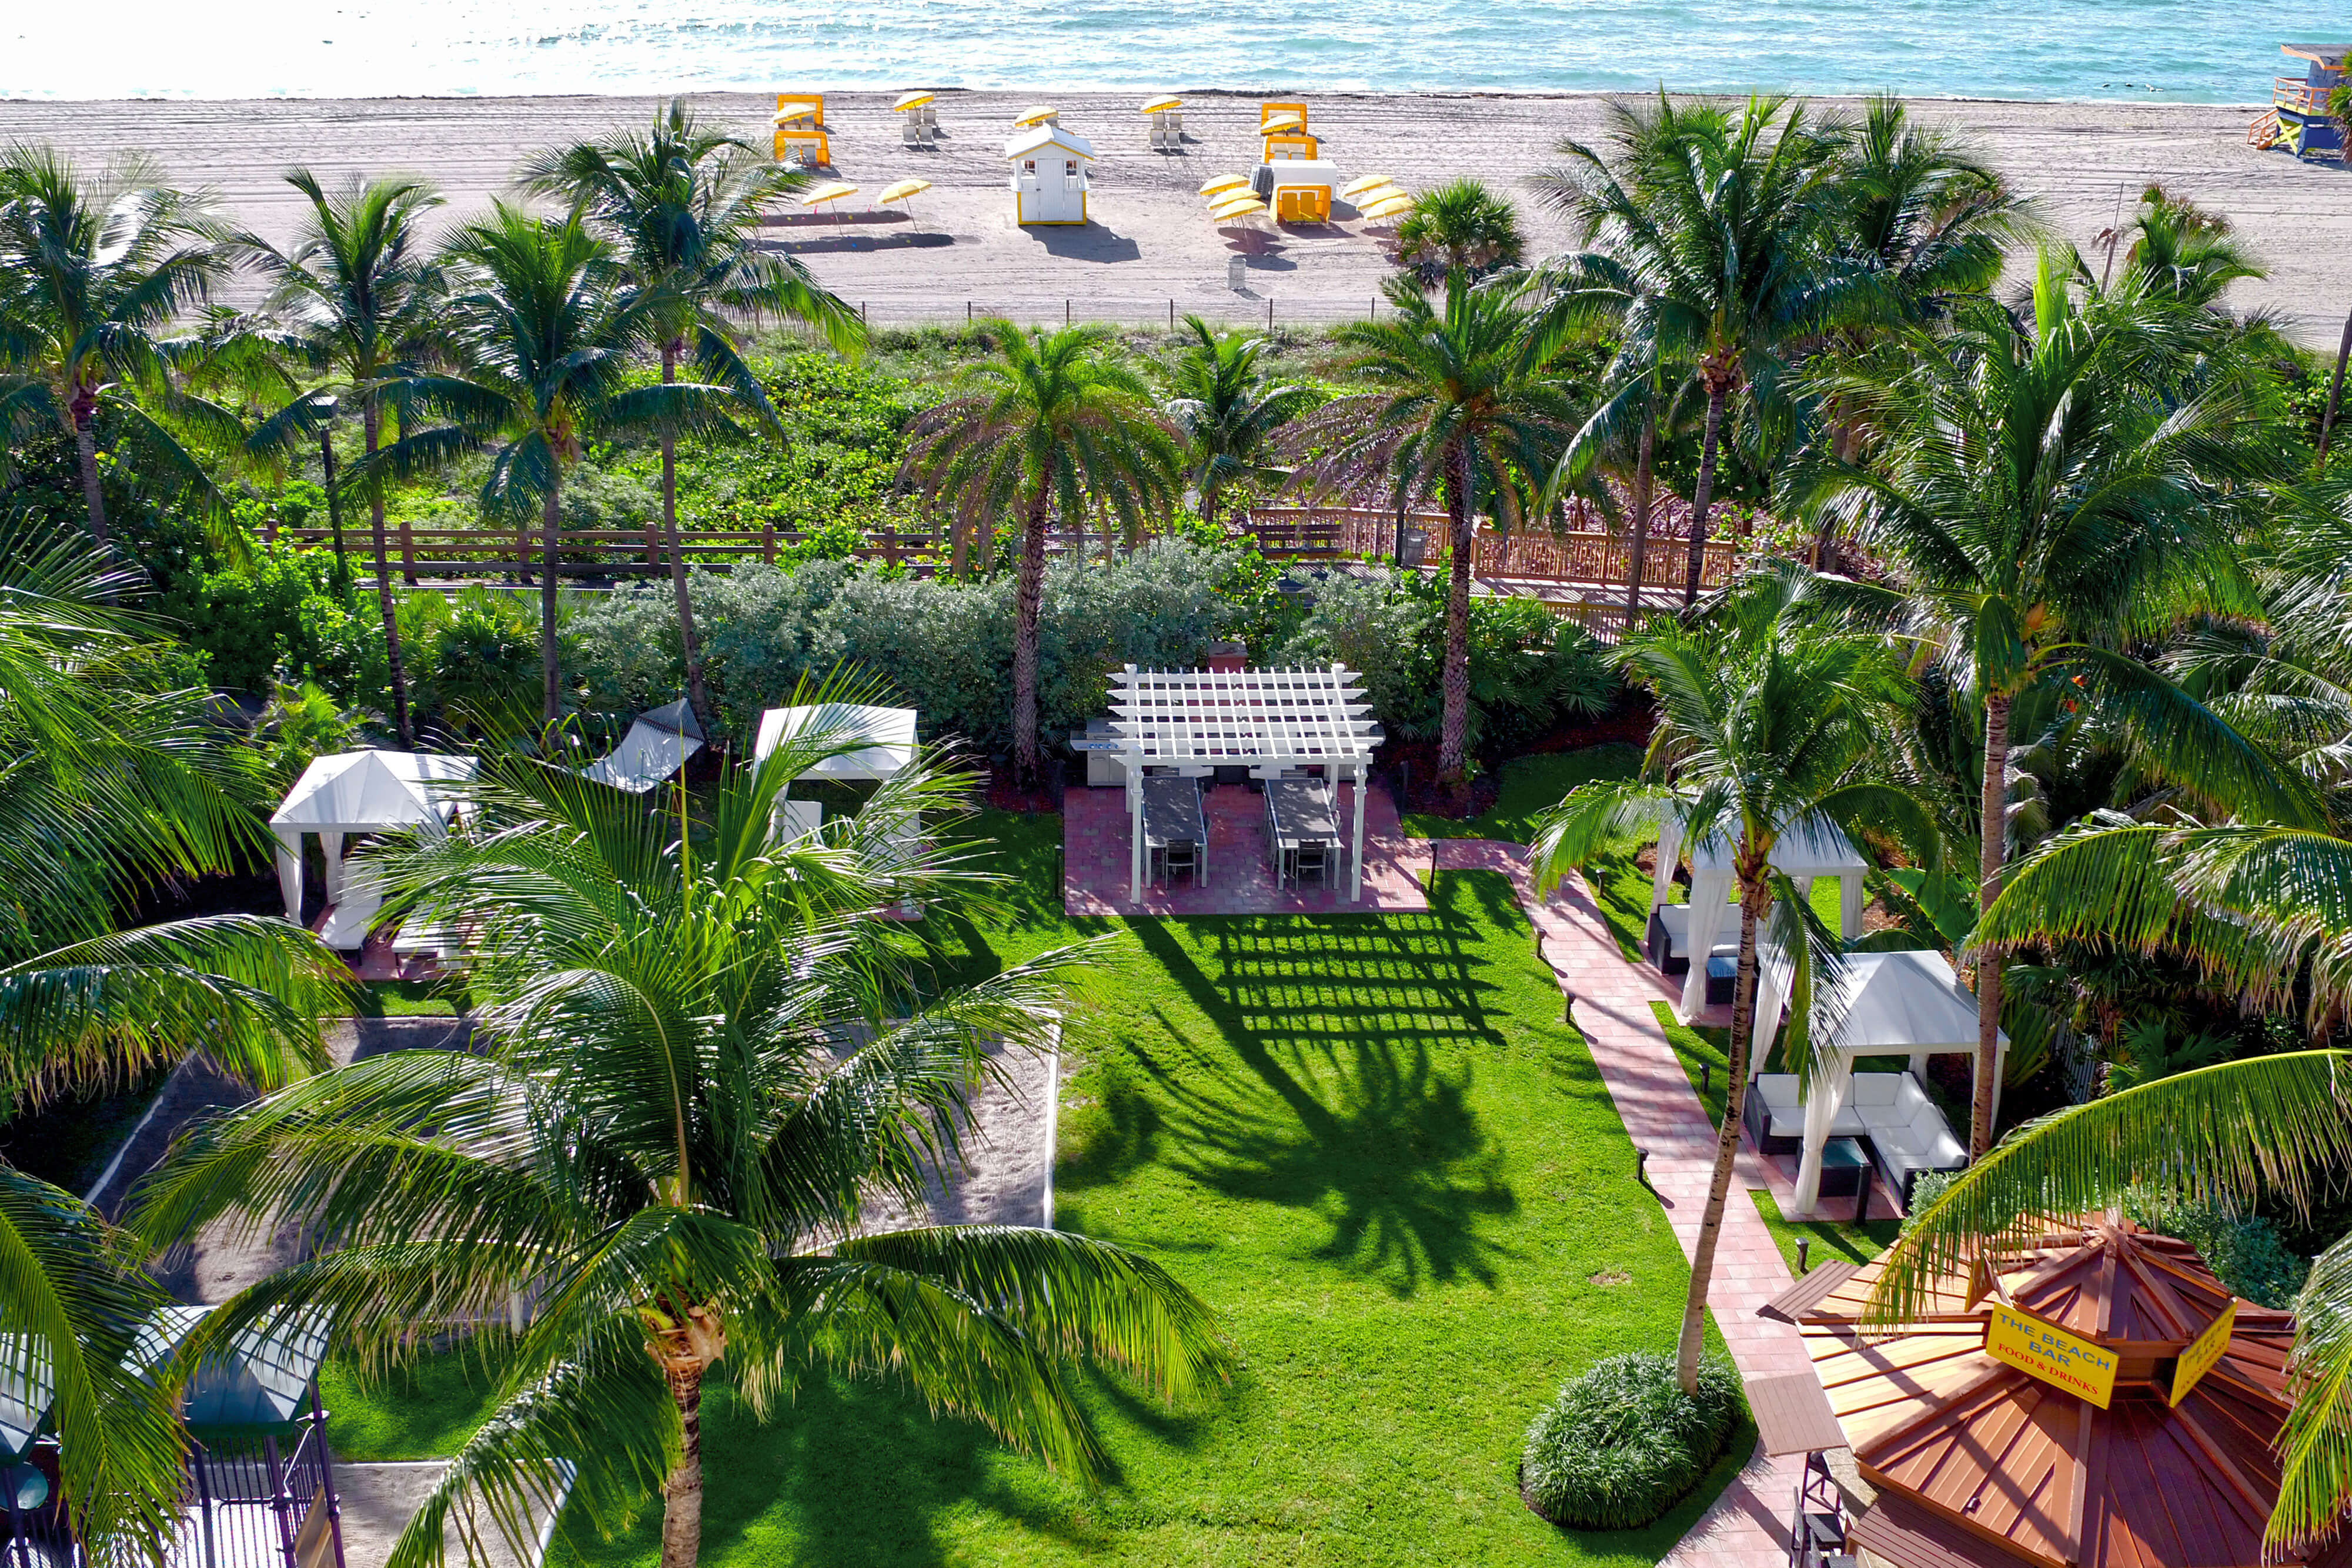 Tropically landscaped oceanfront resort with volleyball court and private cabanas | Westgate South Beach Oceanfront Resort